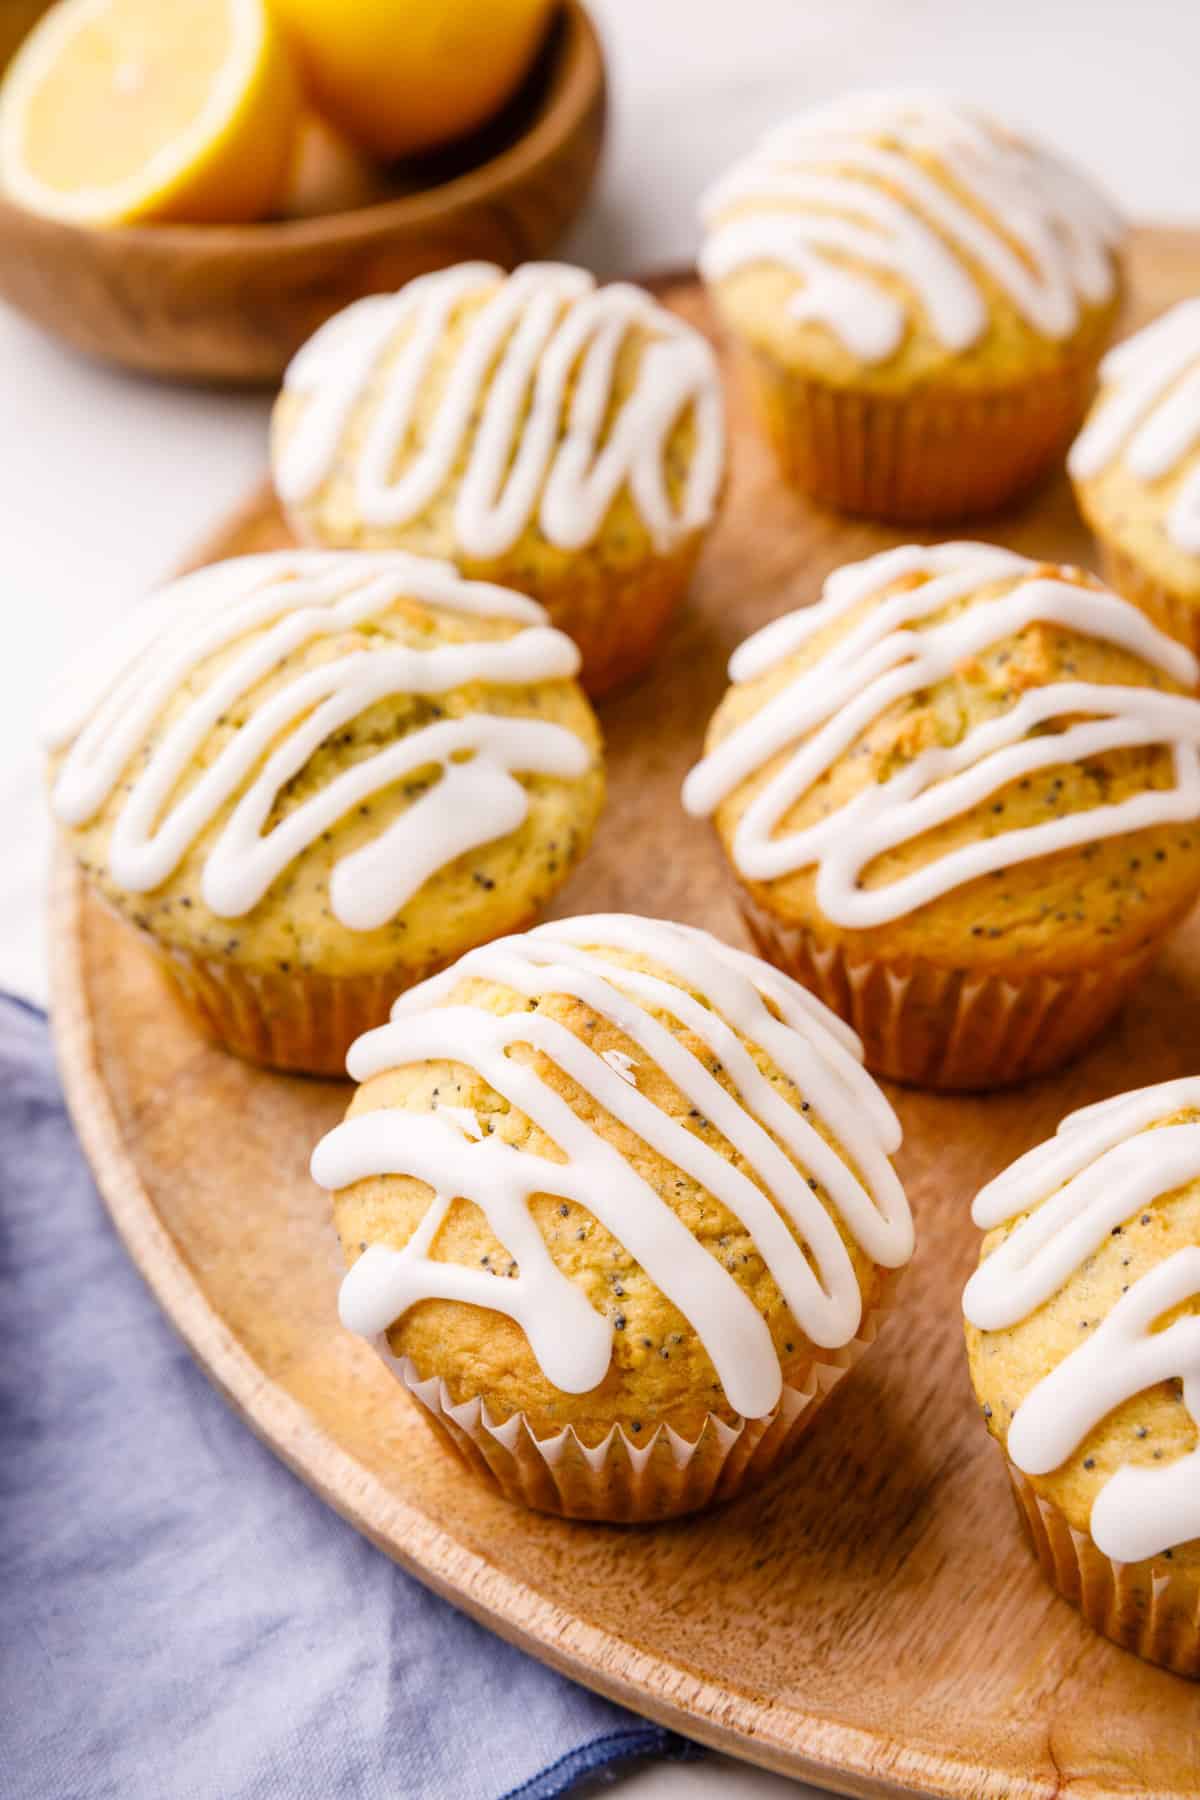 baked lemon poppy seed muffins with glaze served on a wooden plate